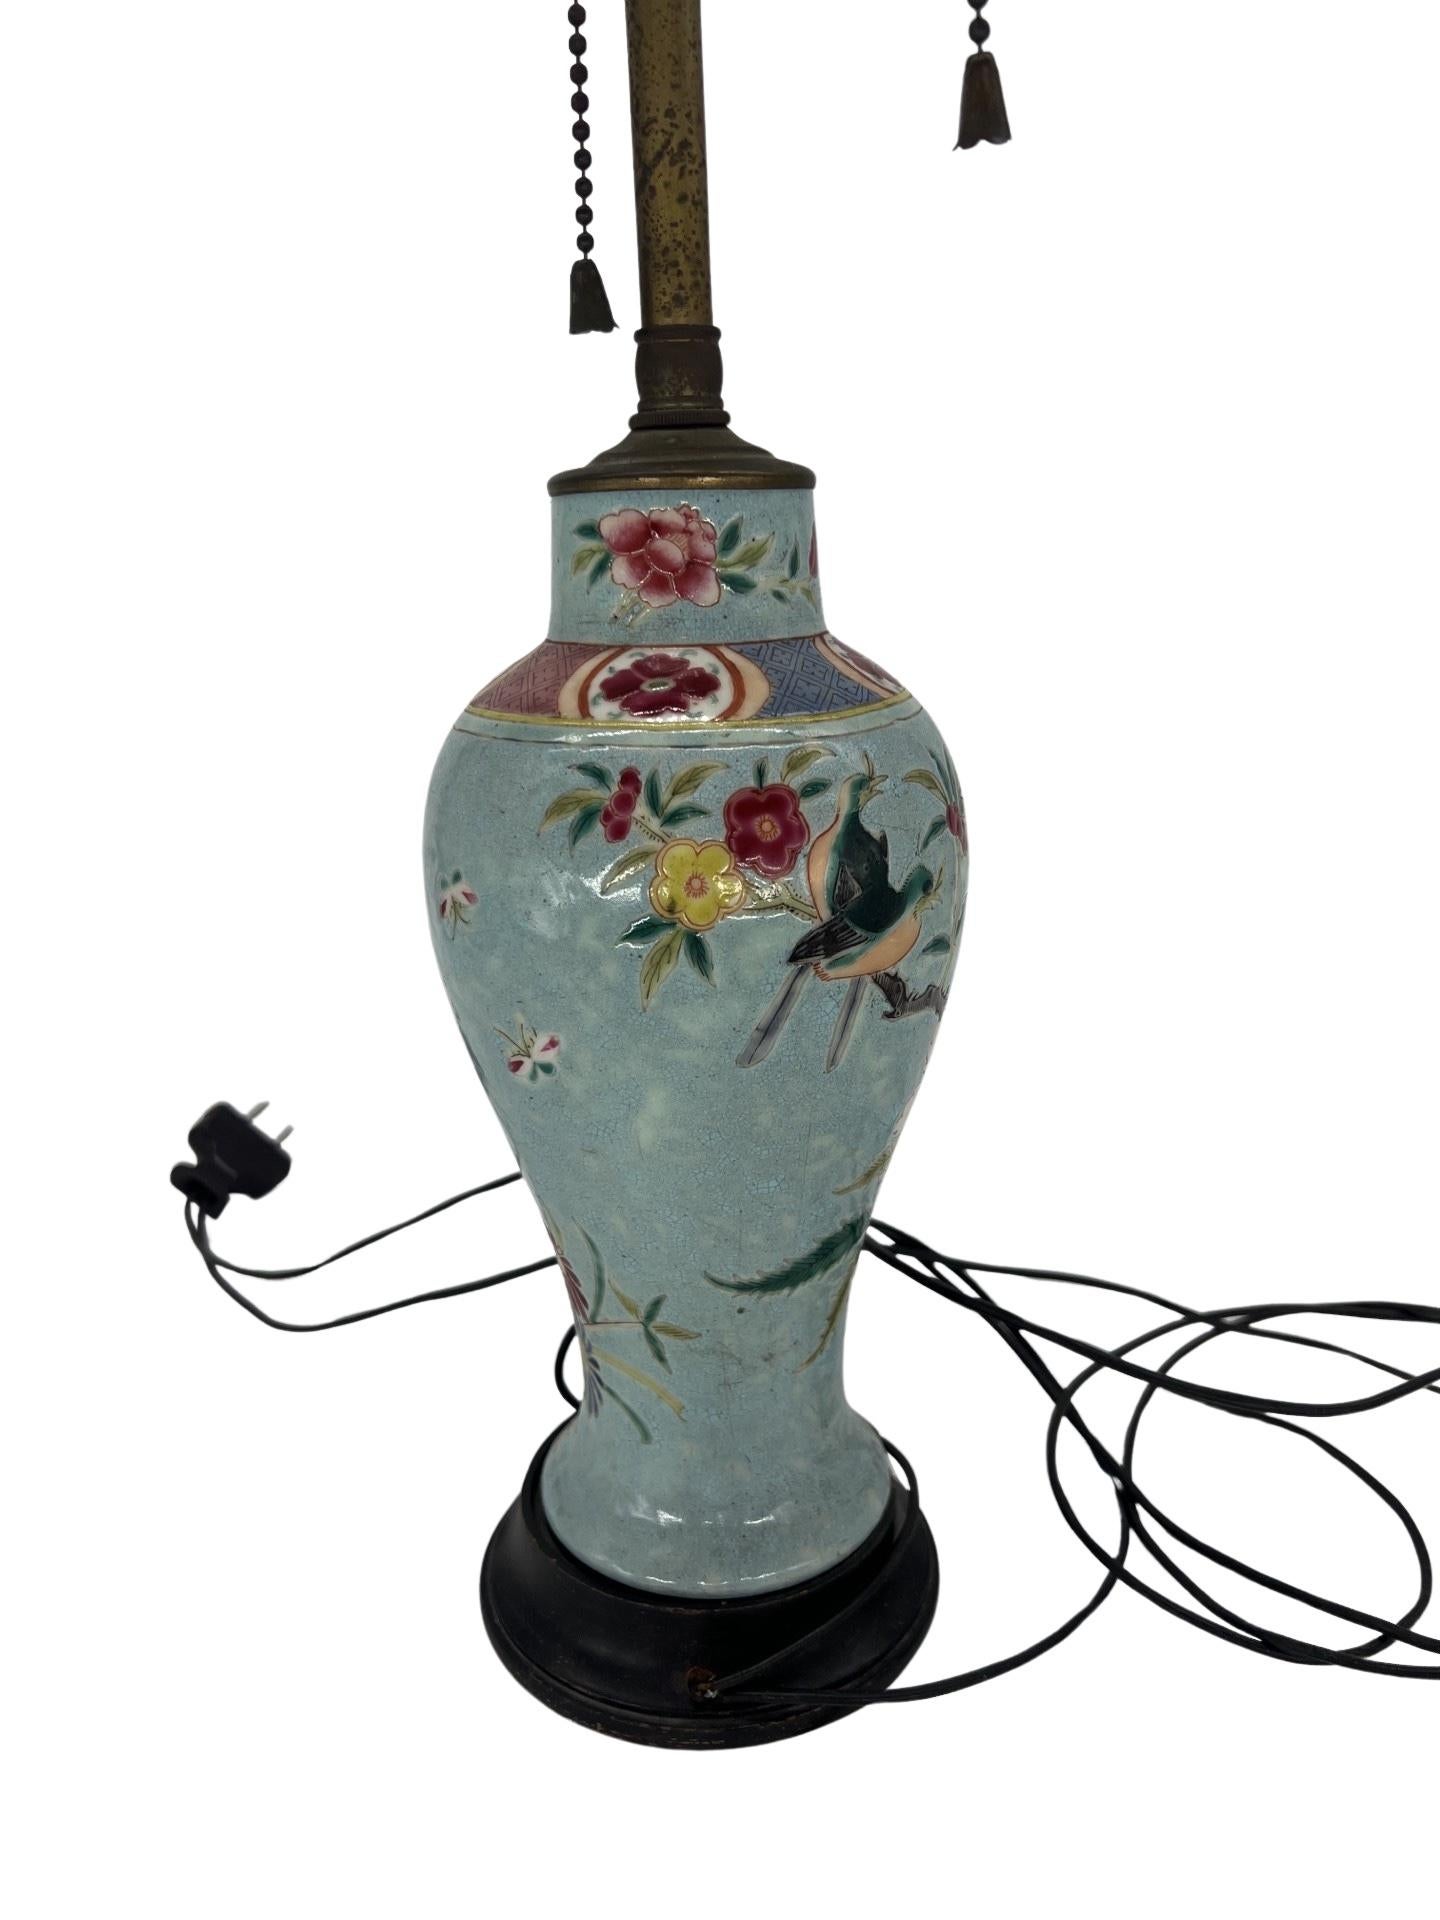 19th Century Chinese Nyonya Ware Porcelain Vase Mounted as a Lamp For Sale 1